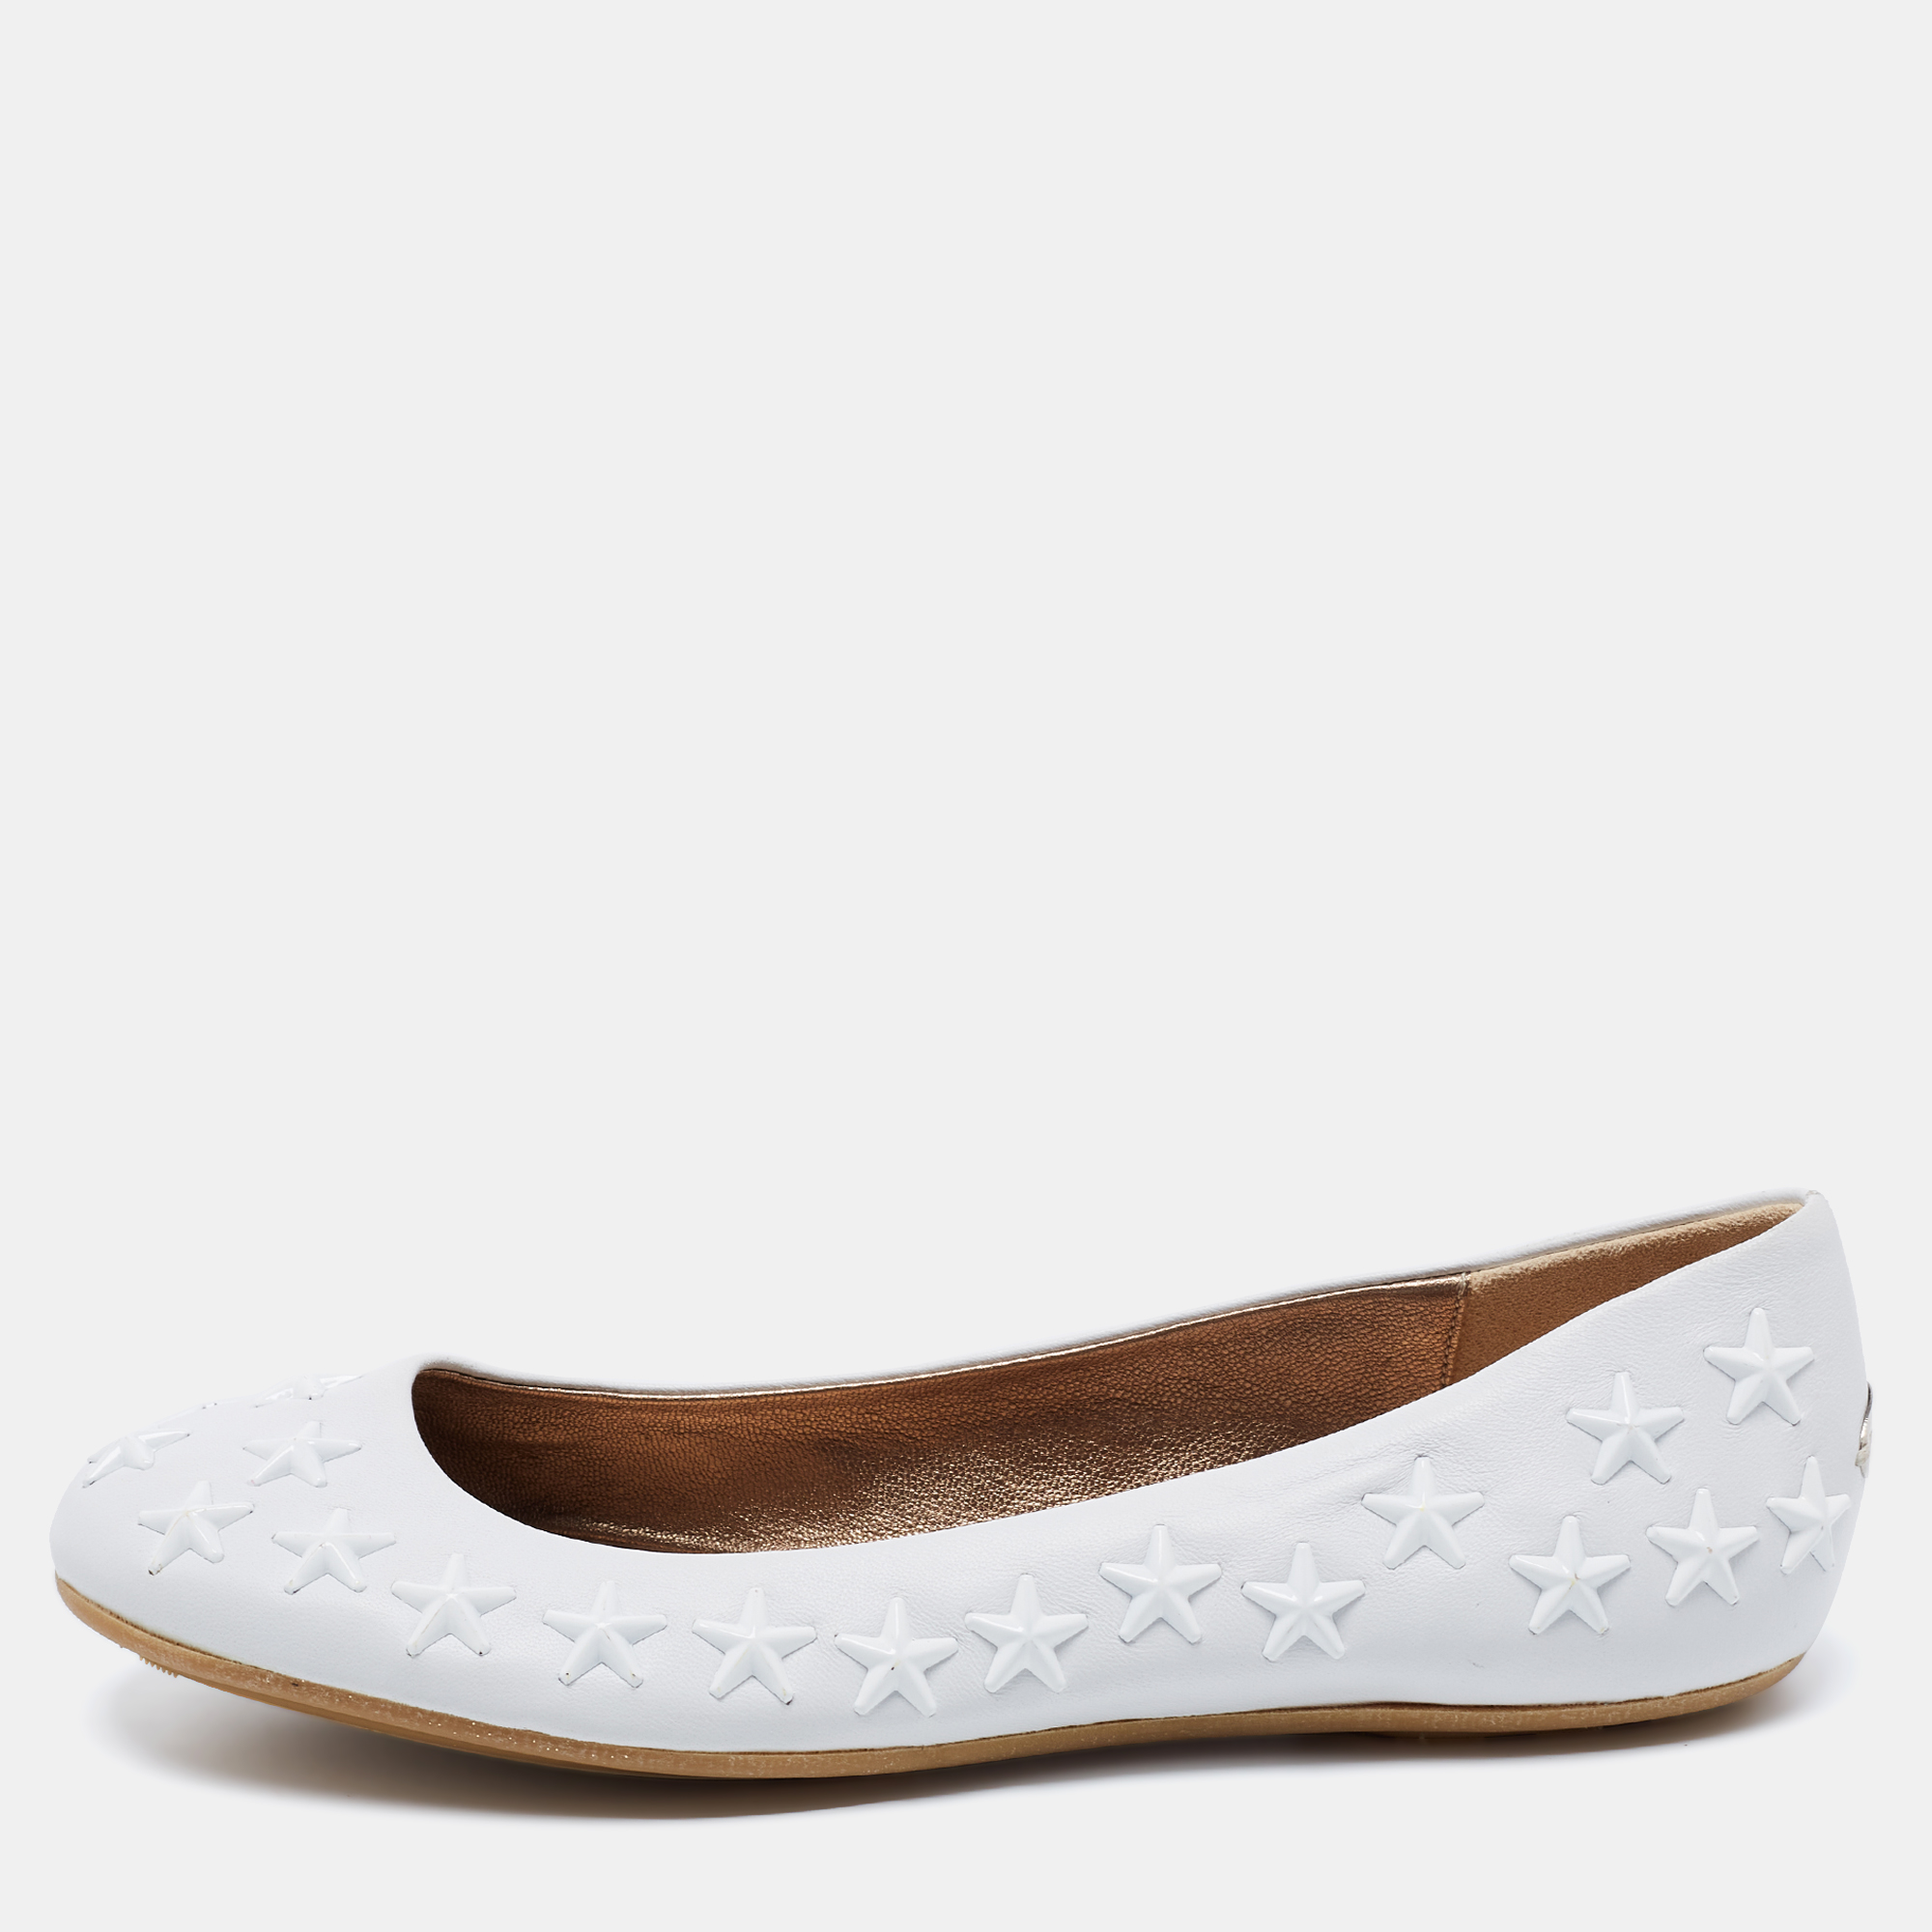 Pre-owned Jimmy Choo White Leather Western Star Ballet Flats Size 37.5